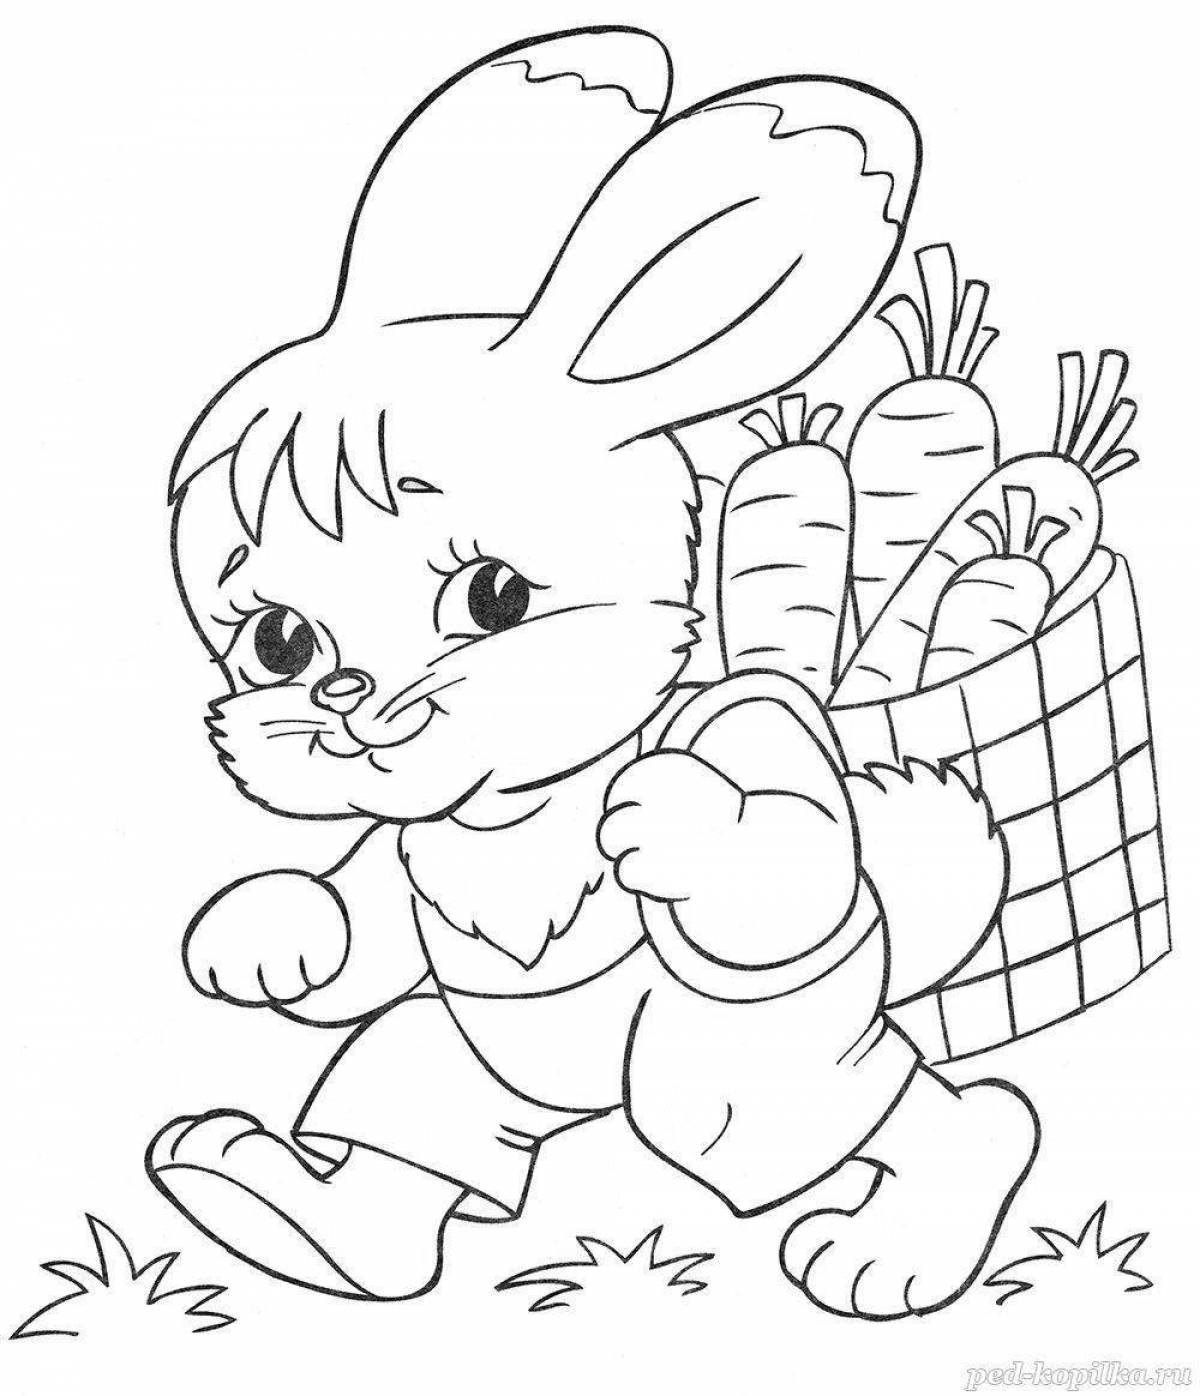 Playful coloring bunny with a gift